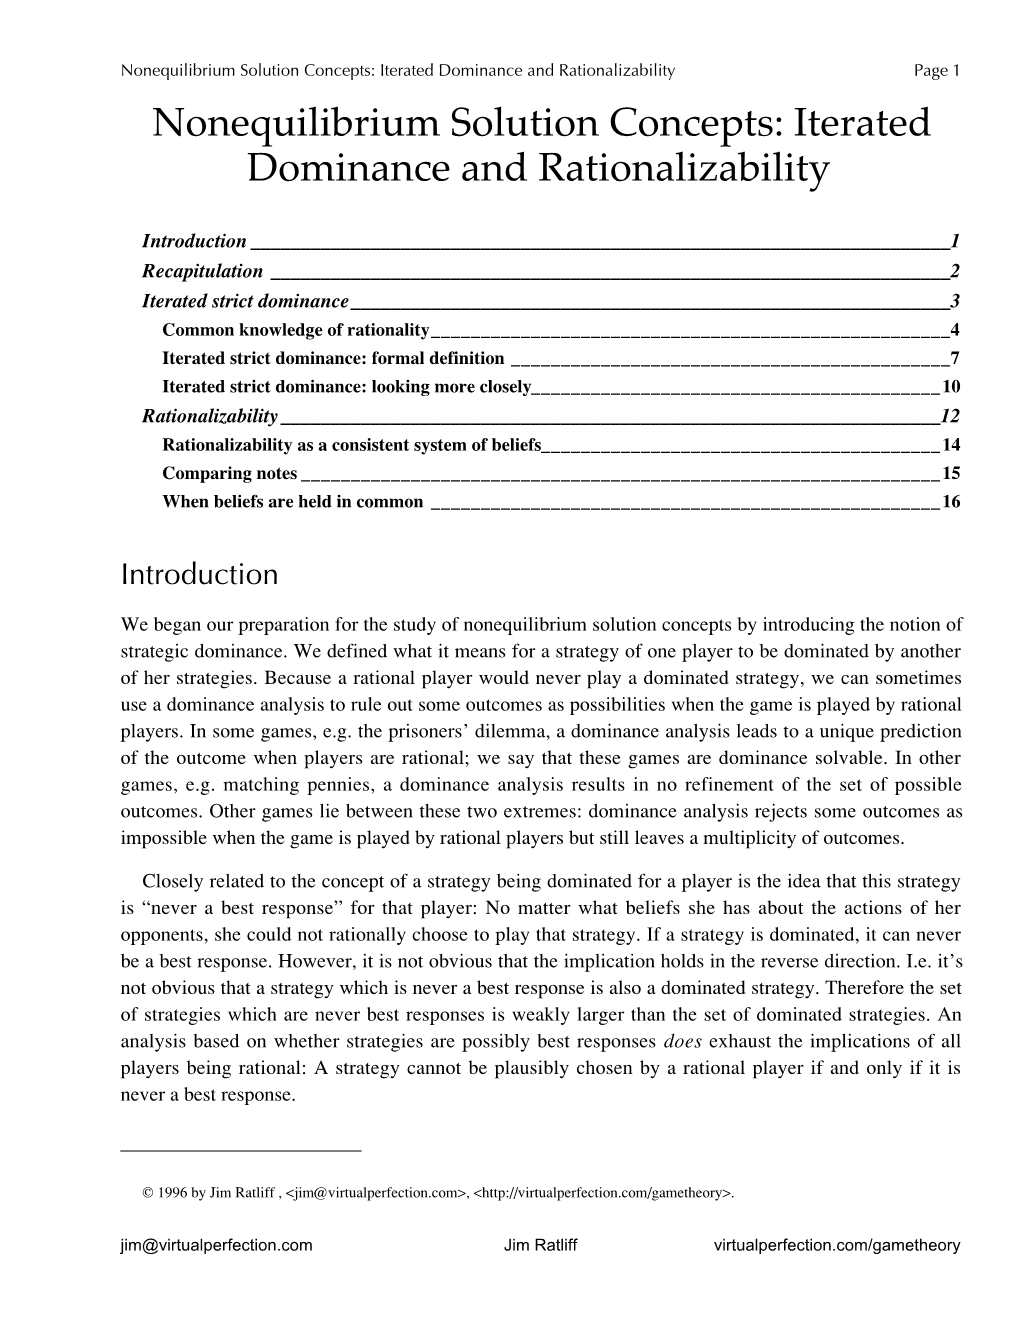 Nonequilibrium Solution Concepts: Iterated Dominance and Rationalizabilityщ